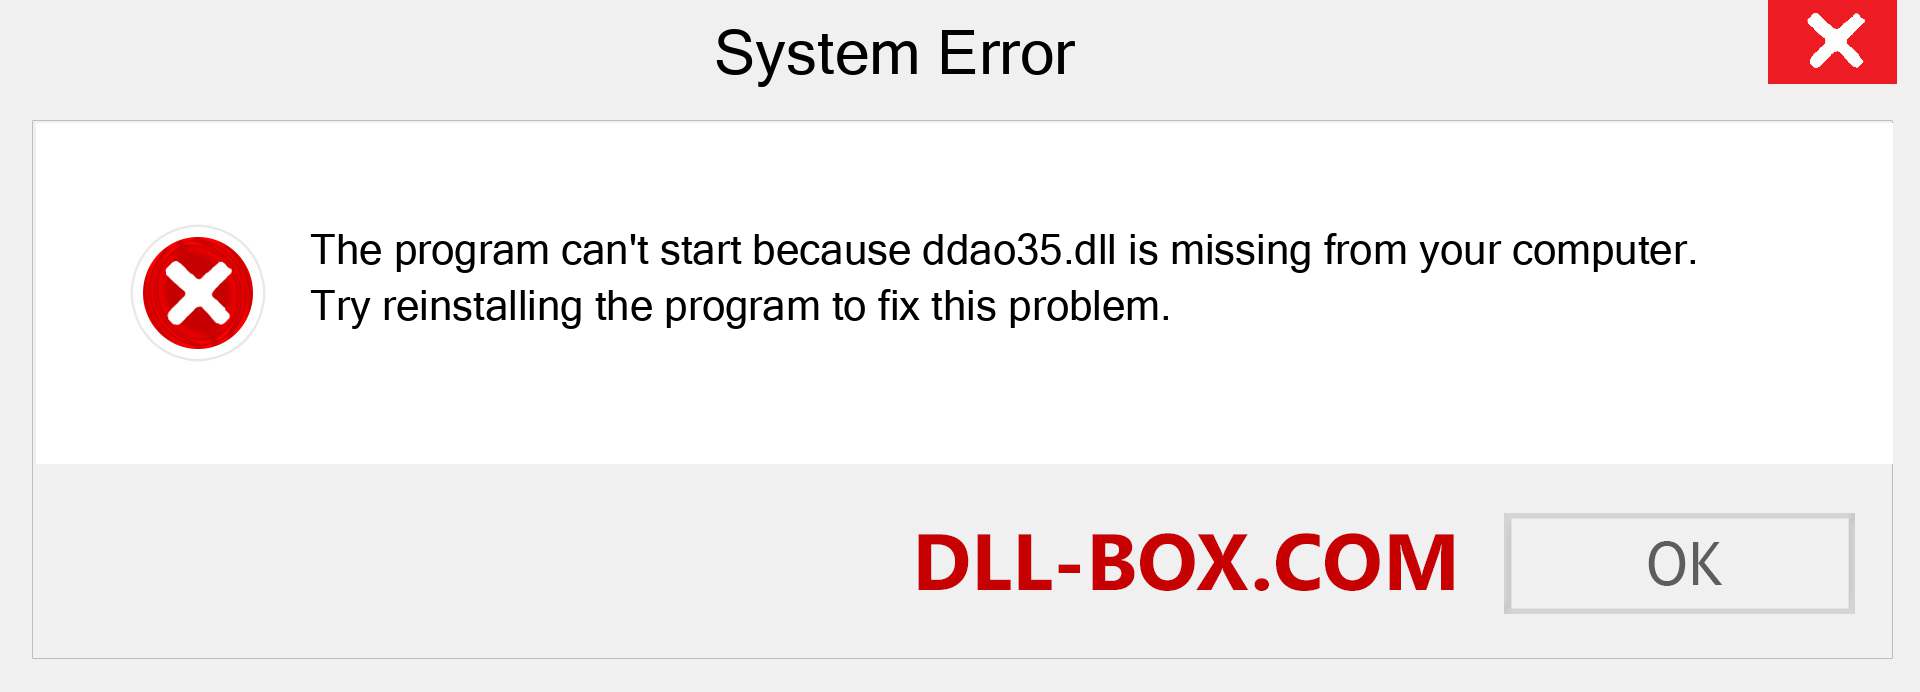  ddao35.dll file is missing?. Download for Windows 7, 8, 10 - Fix  ddao35 dll Missing Error on Windows, photos, images